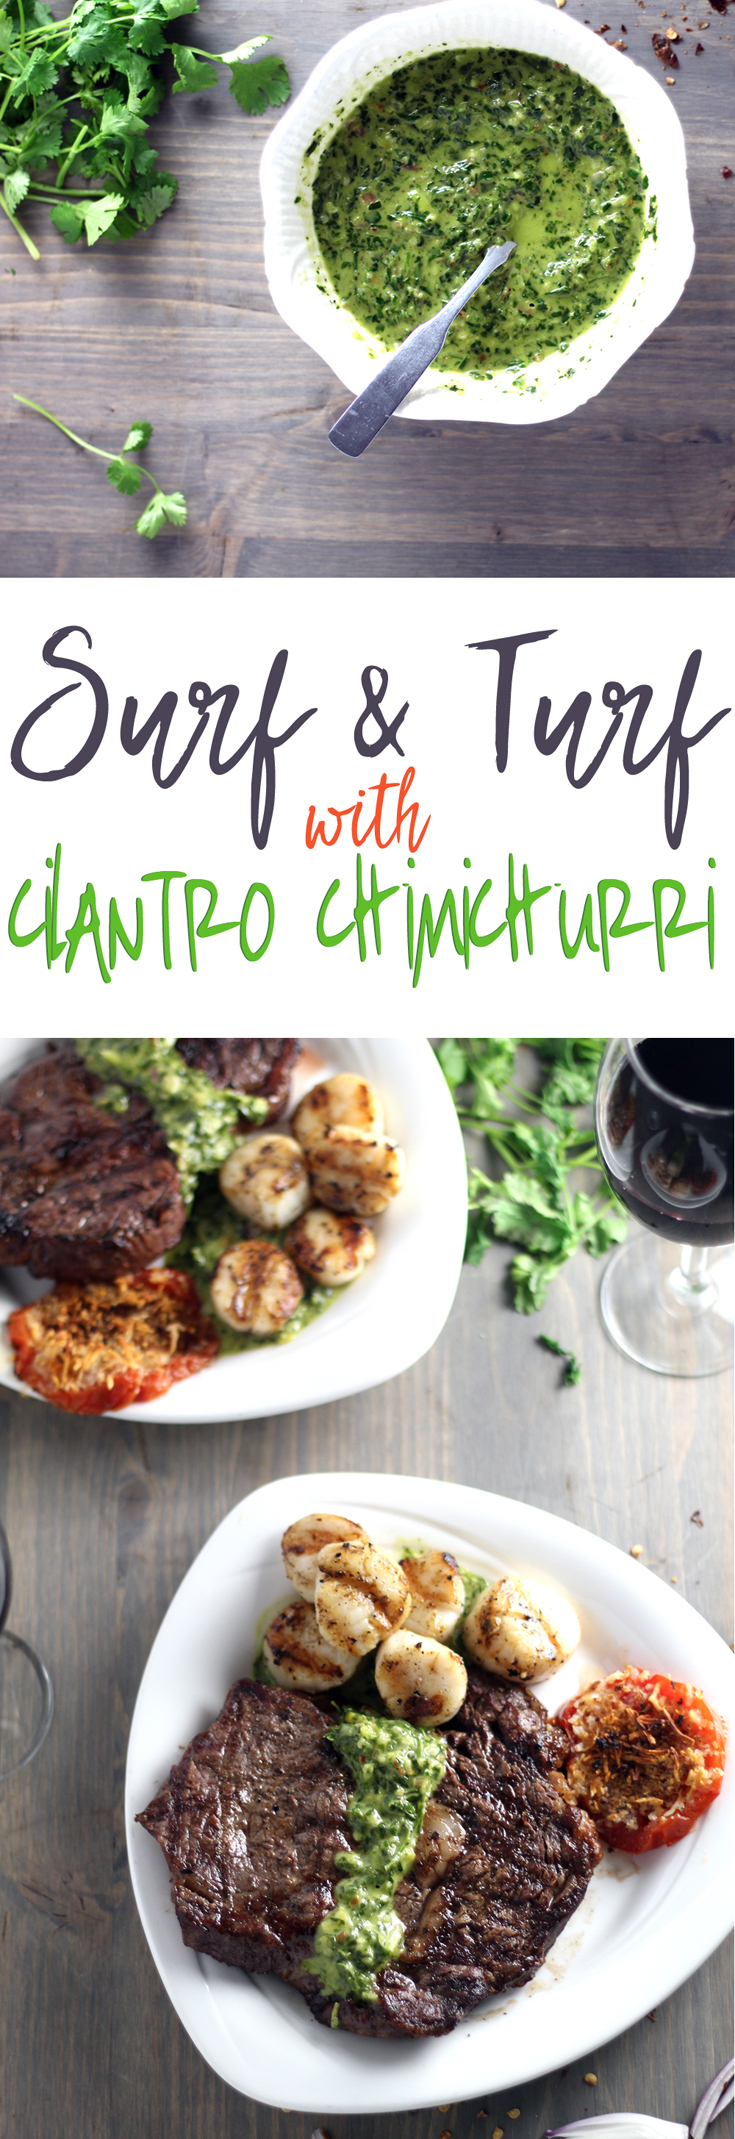 Date Night or Fate Night, Surf and Turf for Two is the recipe you must make for someone special. Extra touches? Wine, candlelight and Cilantro Chimichurri.